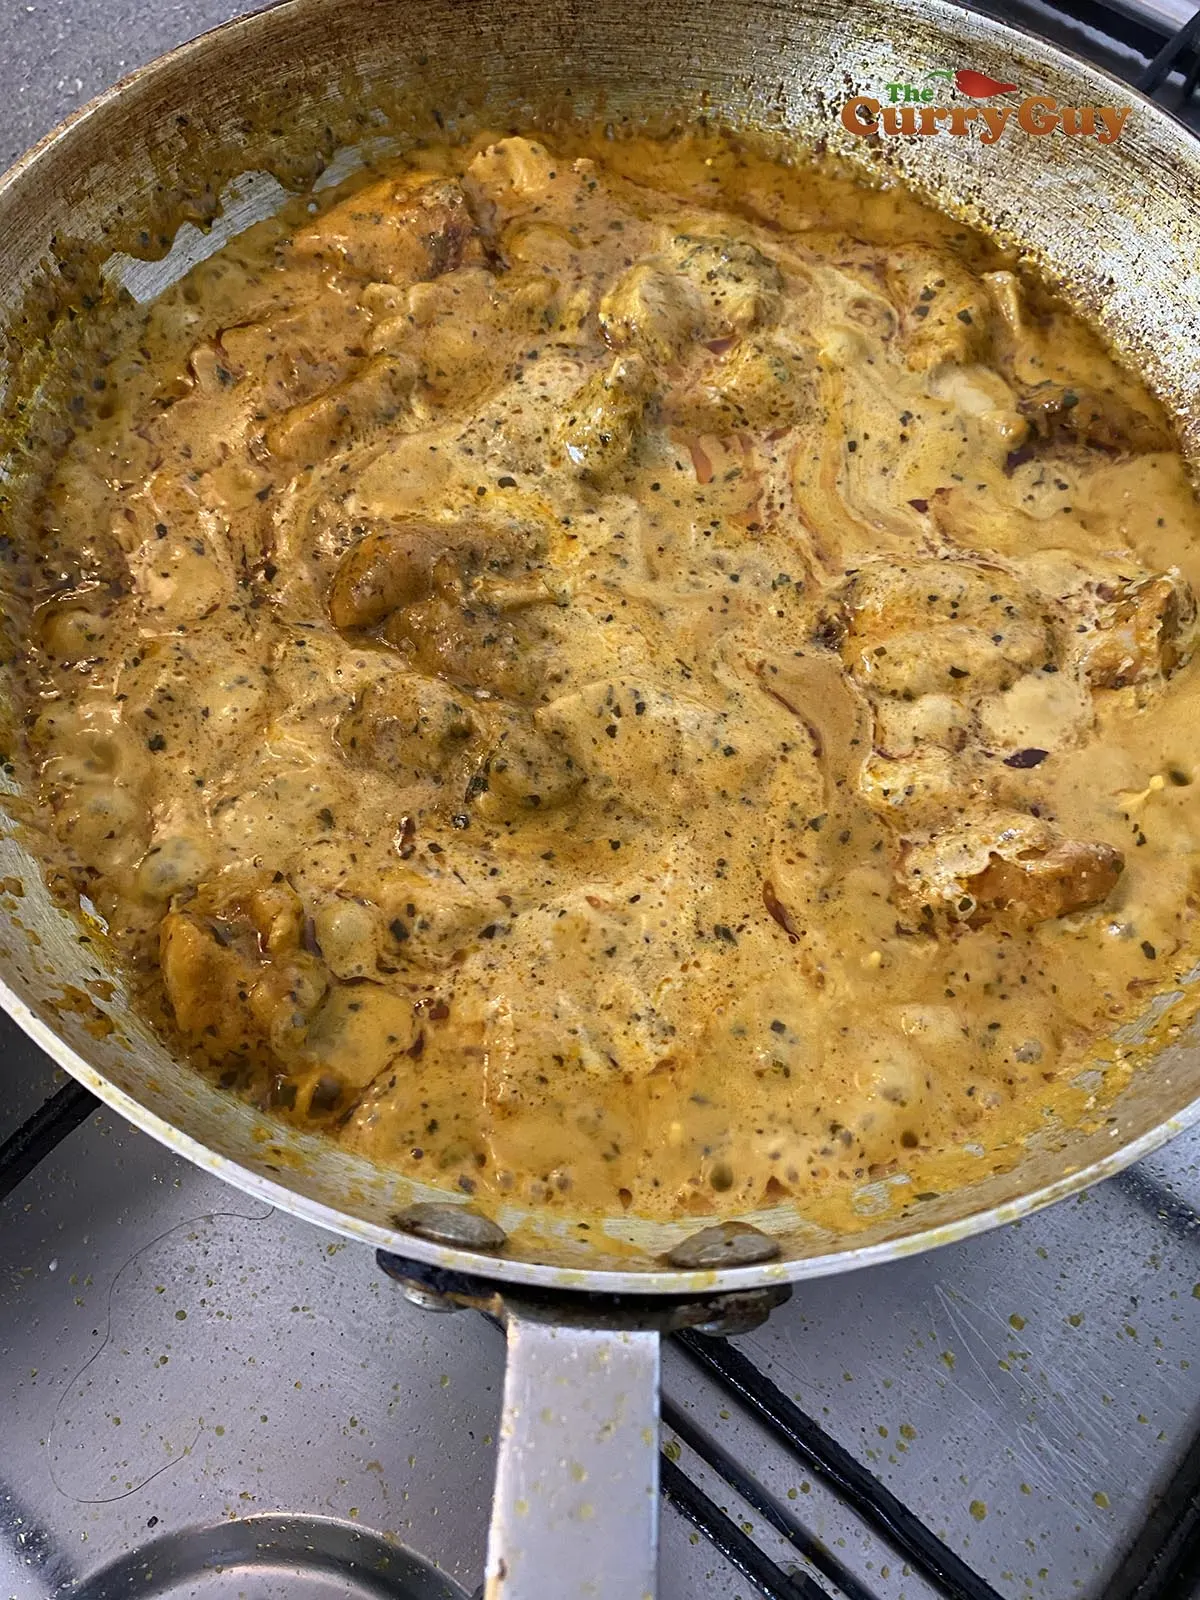 Chicken chasni curry without food colouring